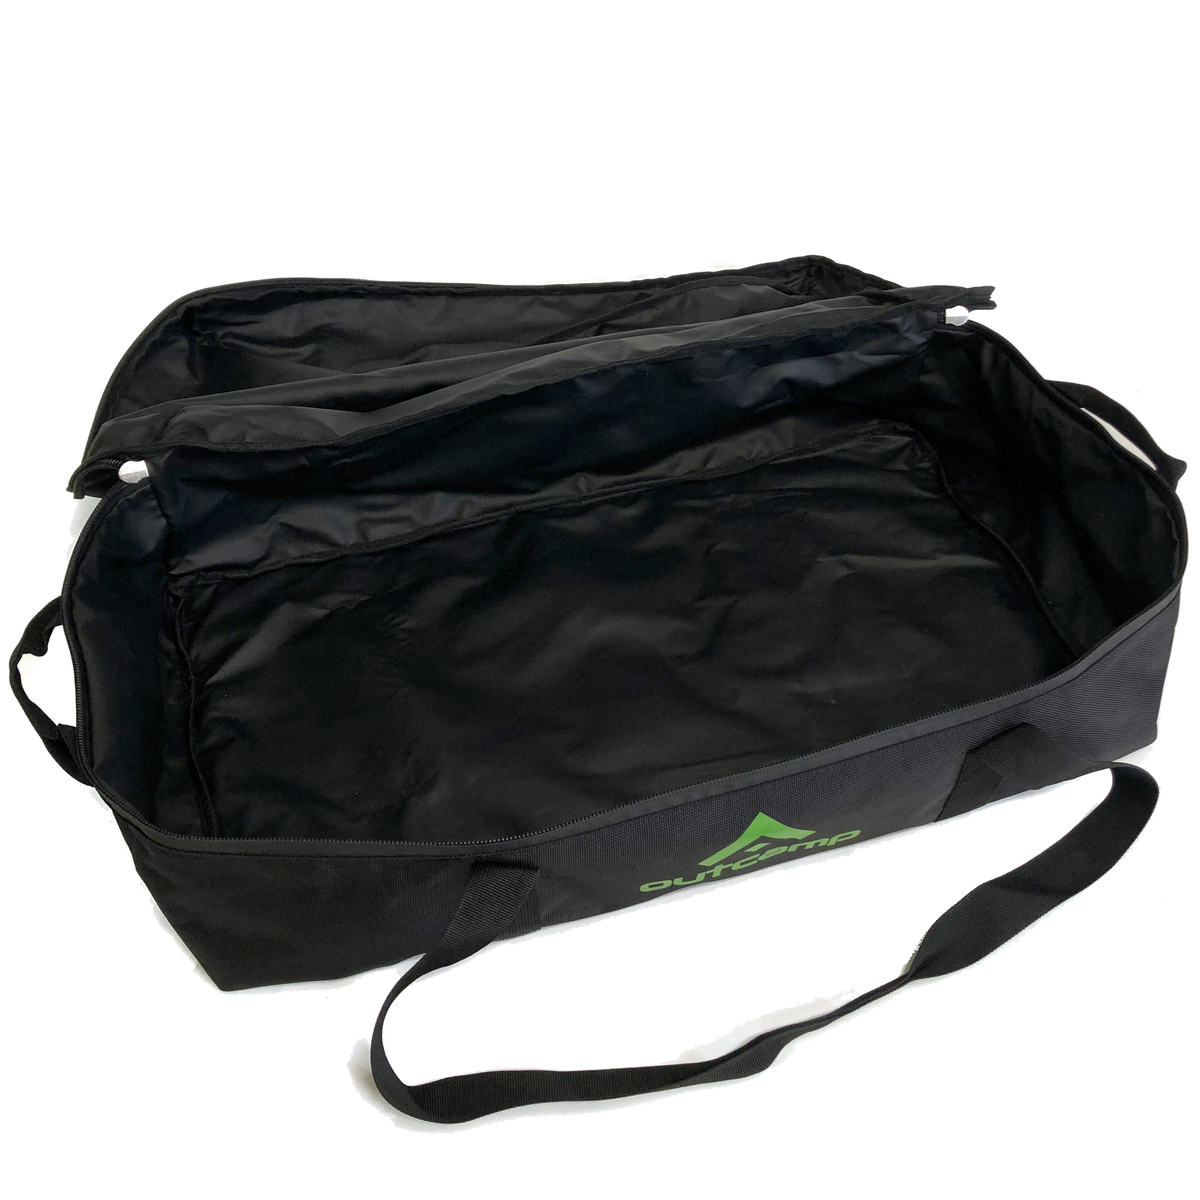 Padded and lined BBQ Travel bag for your caravan